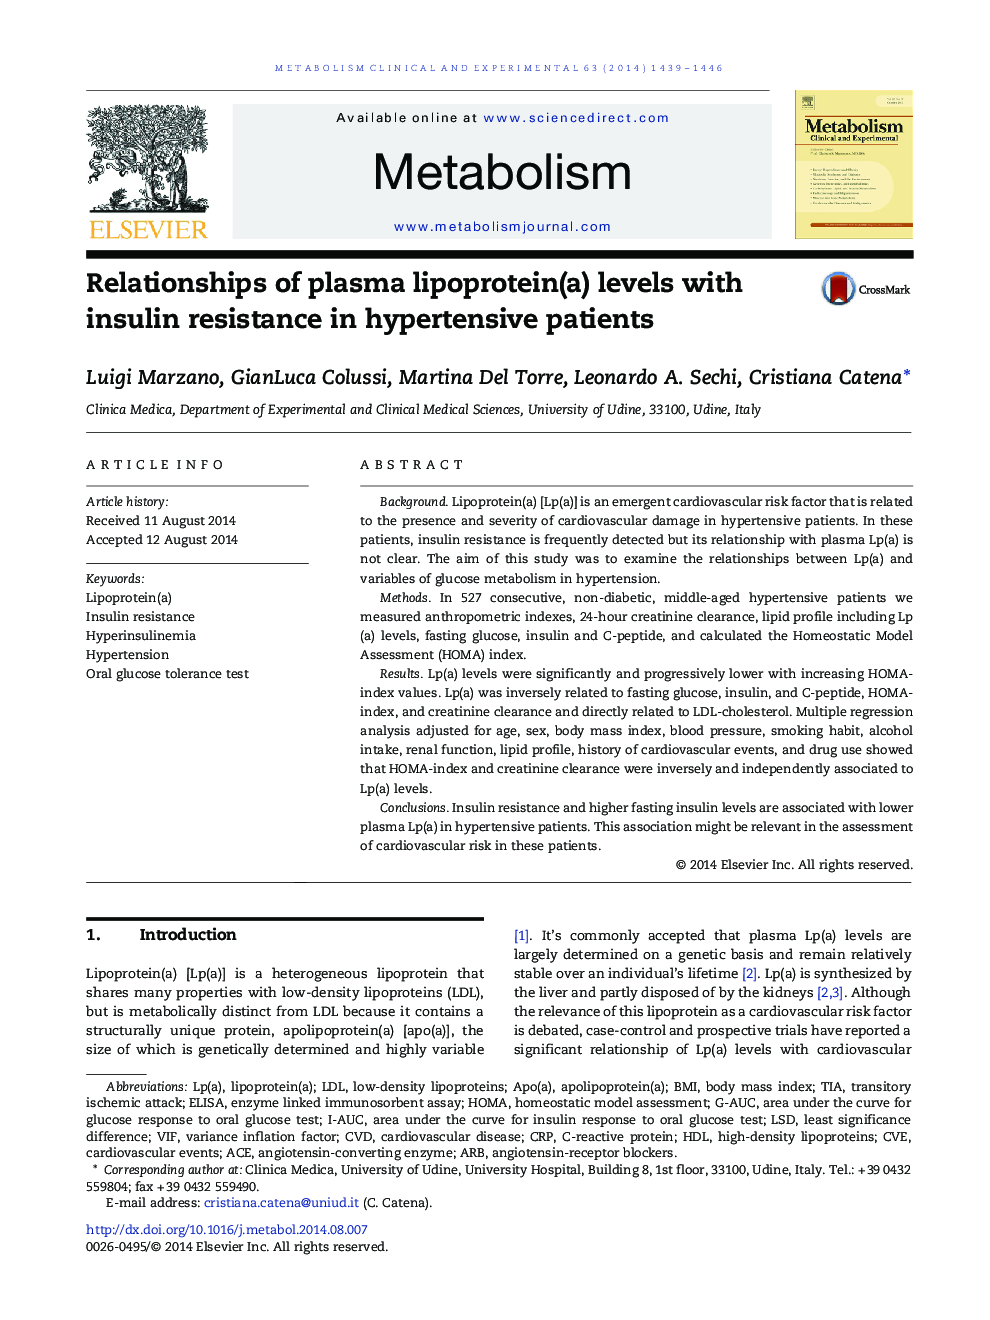 Relationships of plasma lipoprotein(a) levels with insulin resistance in hypertensive patients